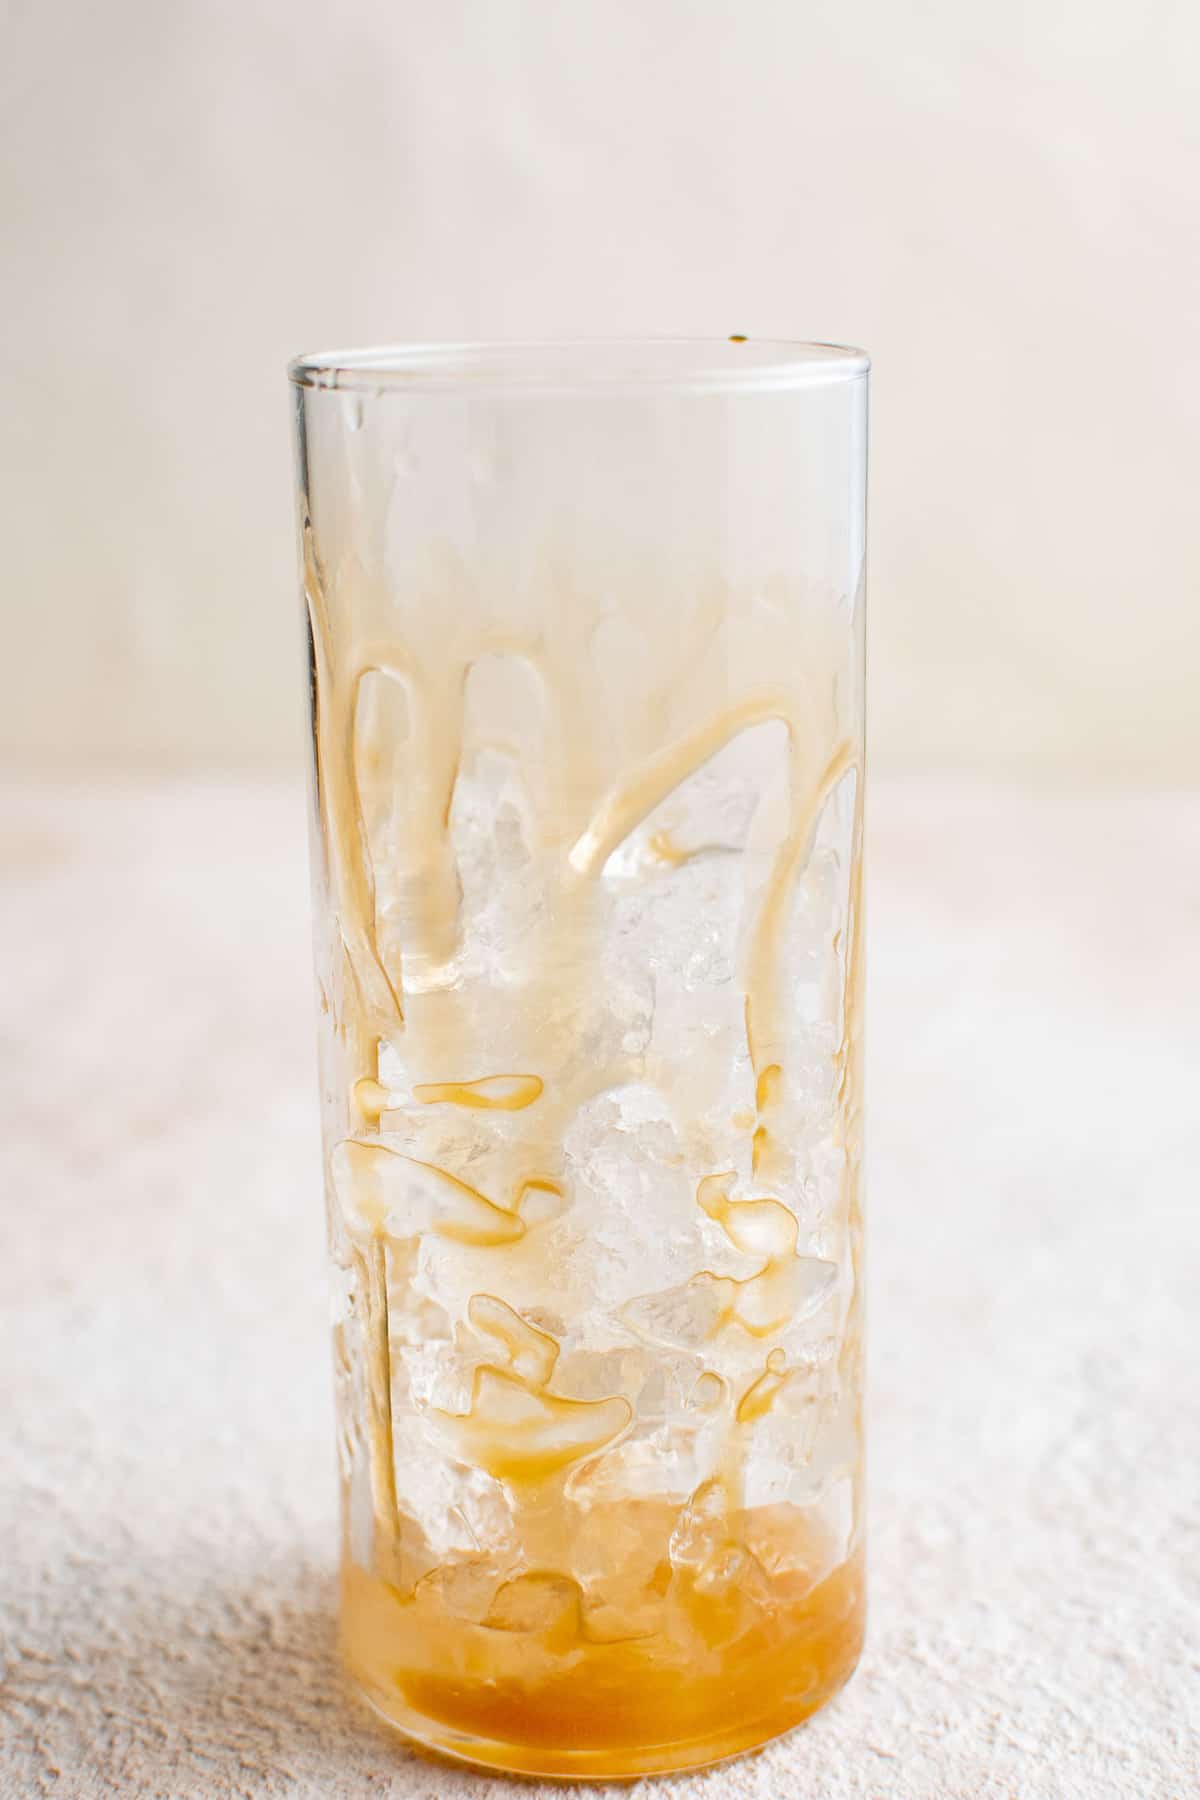 Caramel drizzled in an empty glass.